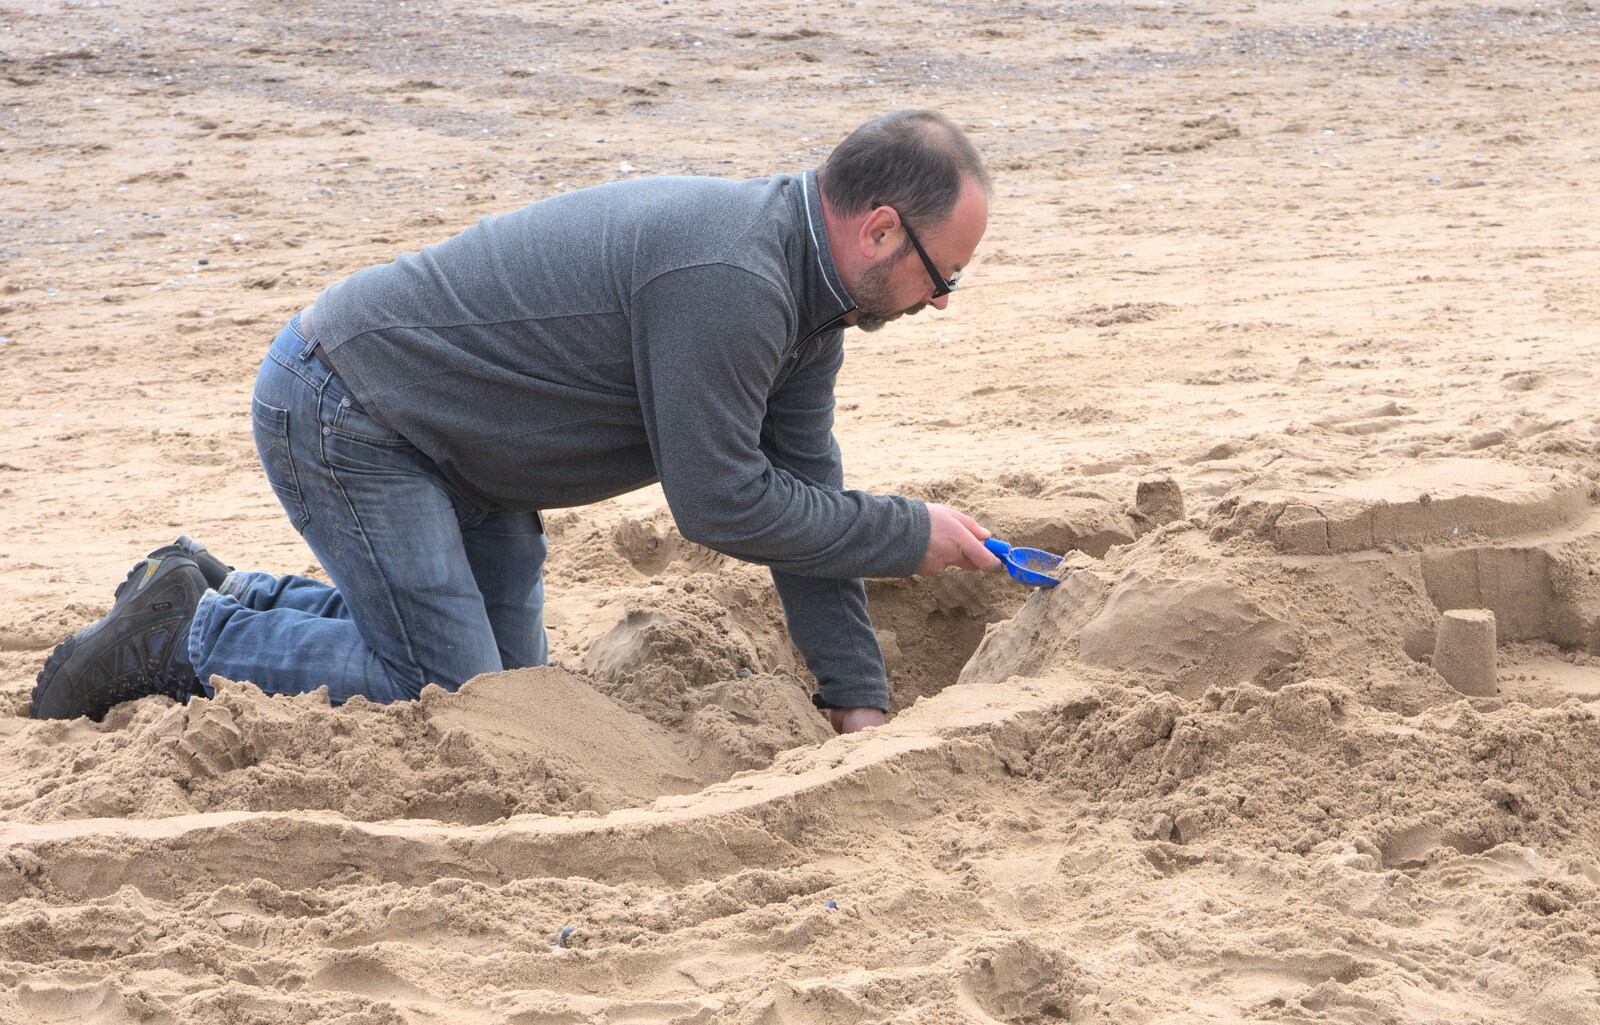 Matt builds sandcastles from Grandma J's and a Day on the Beach, Spreyton and Exmouth, Devon - 13th April 2017